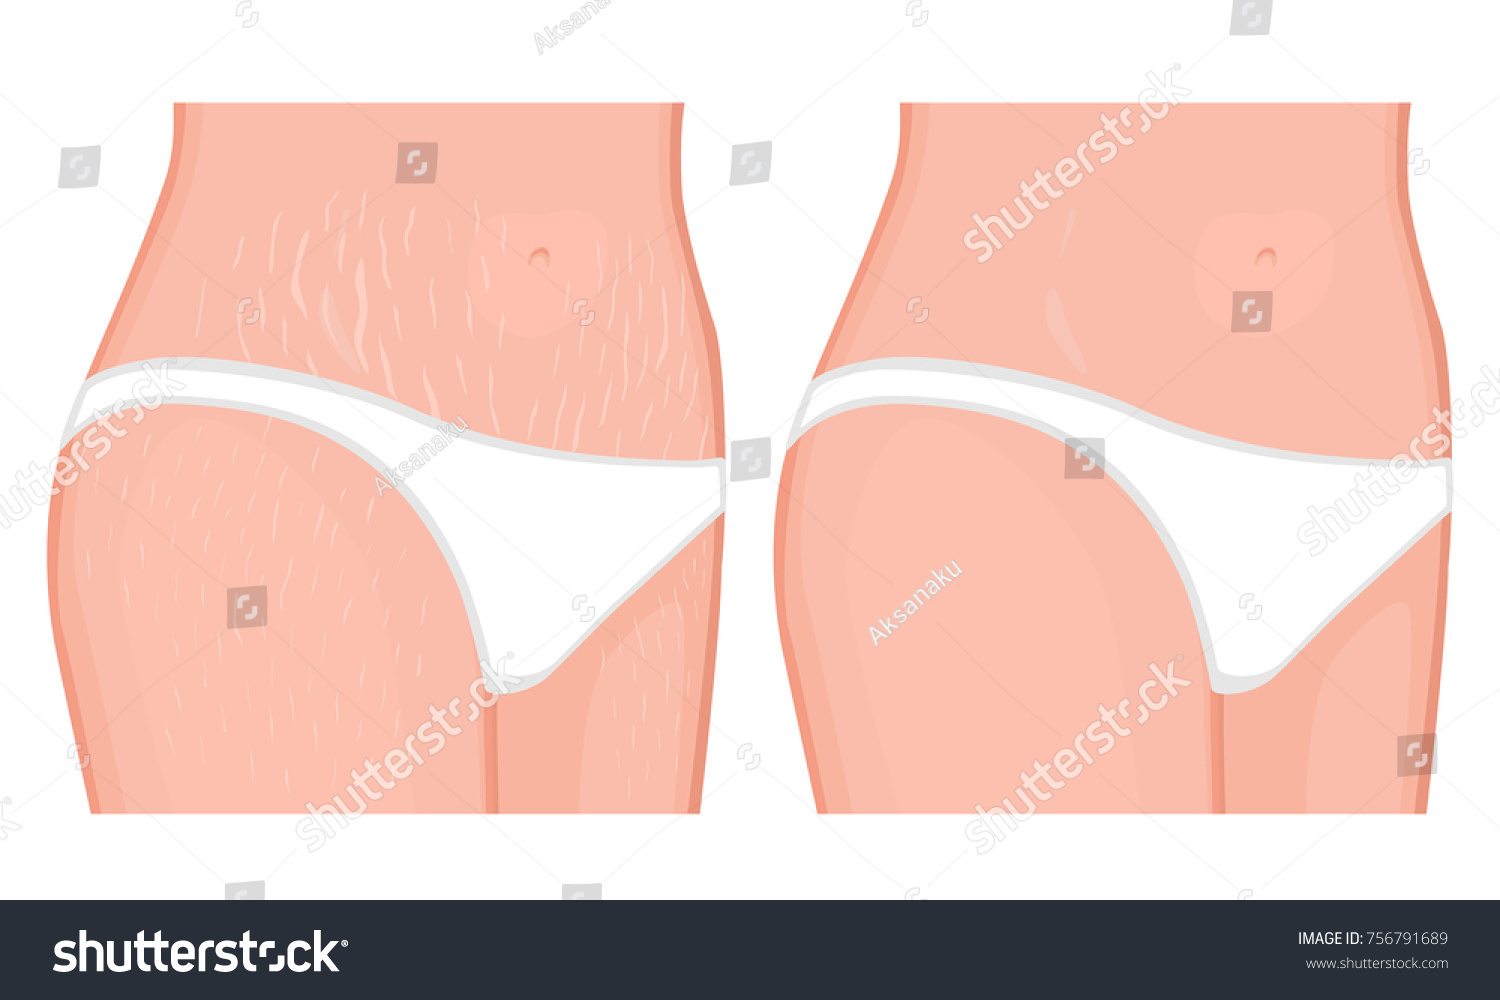 SVG of Vector illustration of human body problem. Healing of stretch marks on European, Asian women belly and legs. For advertising, medical publications, use on package of medicinal products, creams. EPS 8 svg